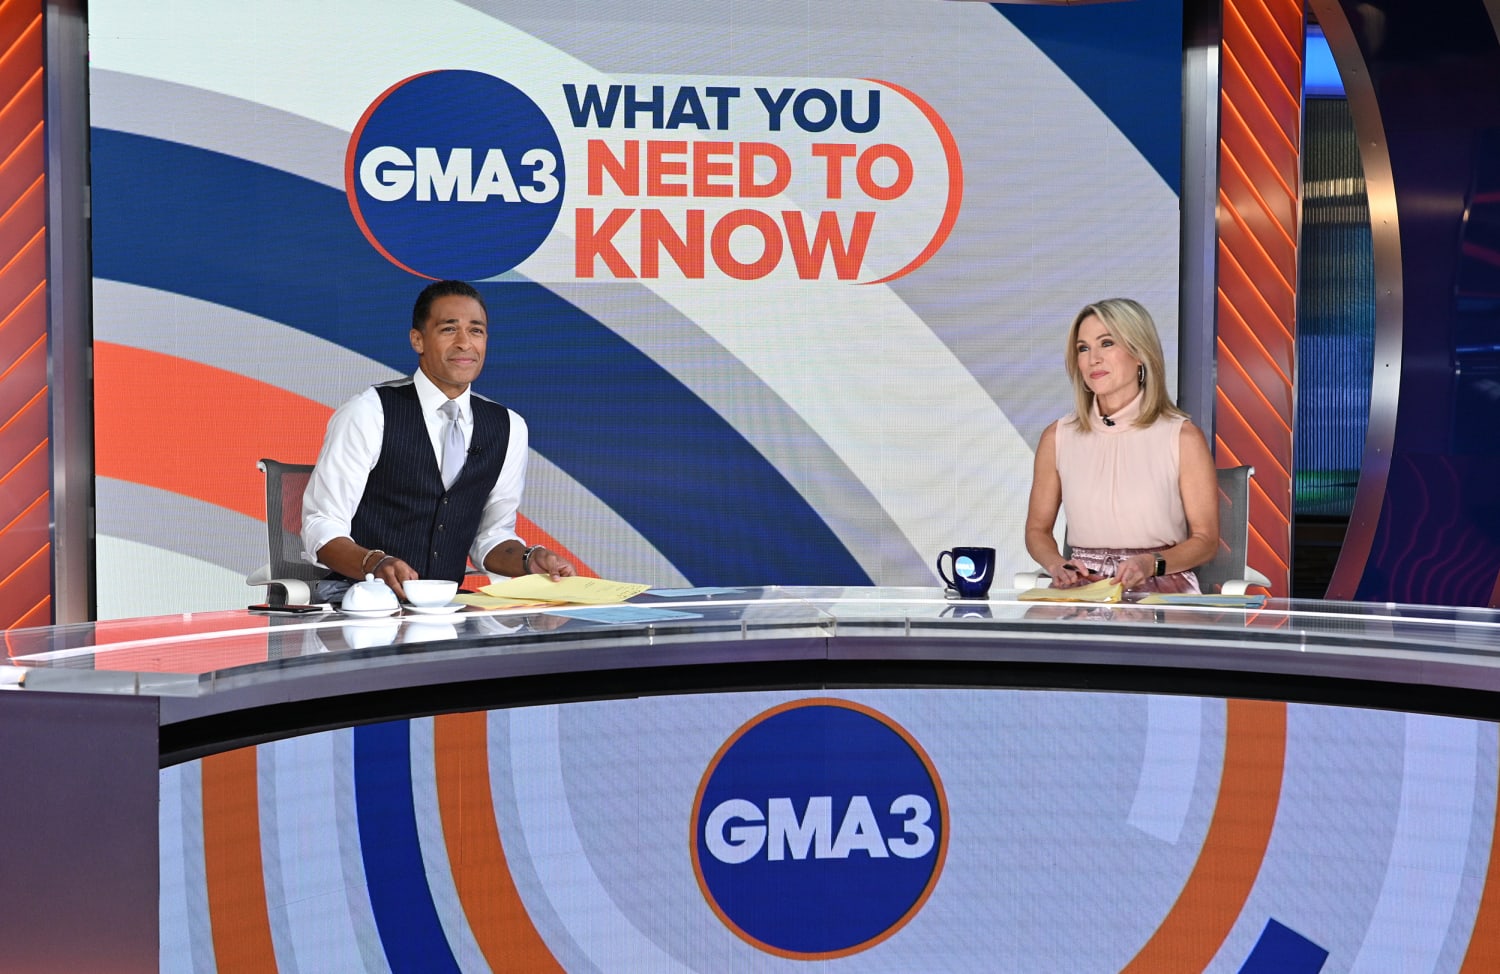 'GMA3' anchors T.J. Holmes and Amy Robach taken off air after news of their relationship surfaced